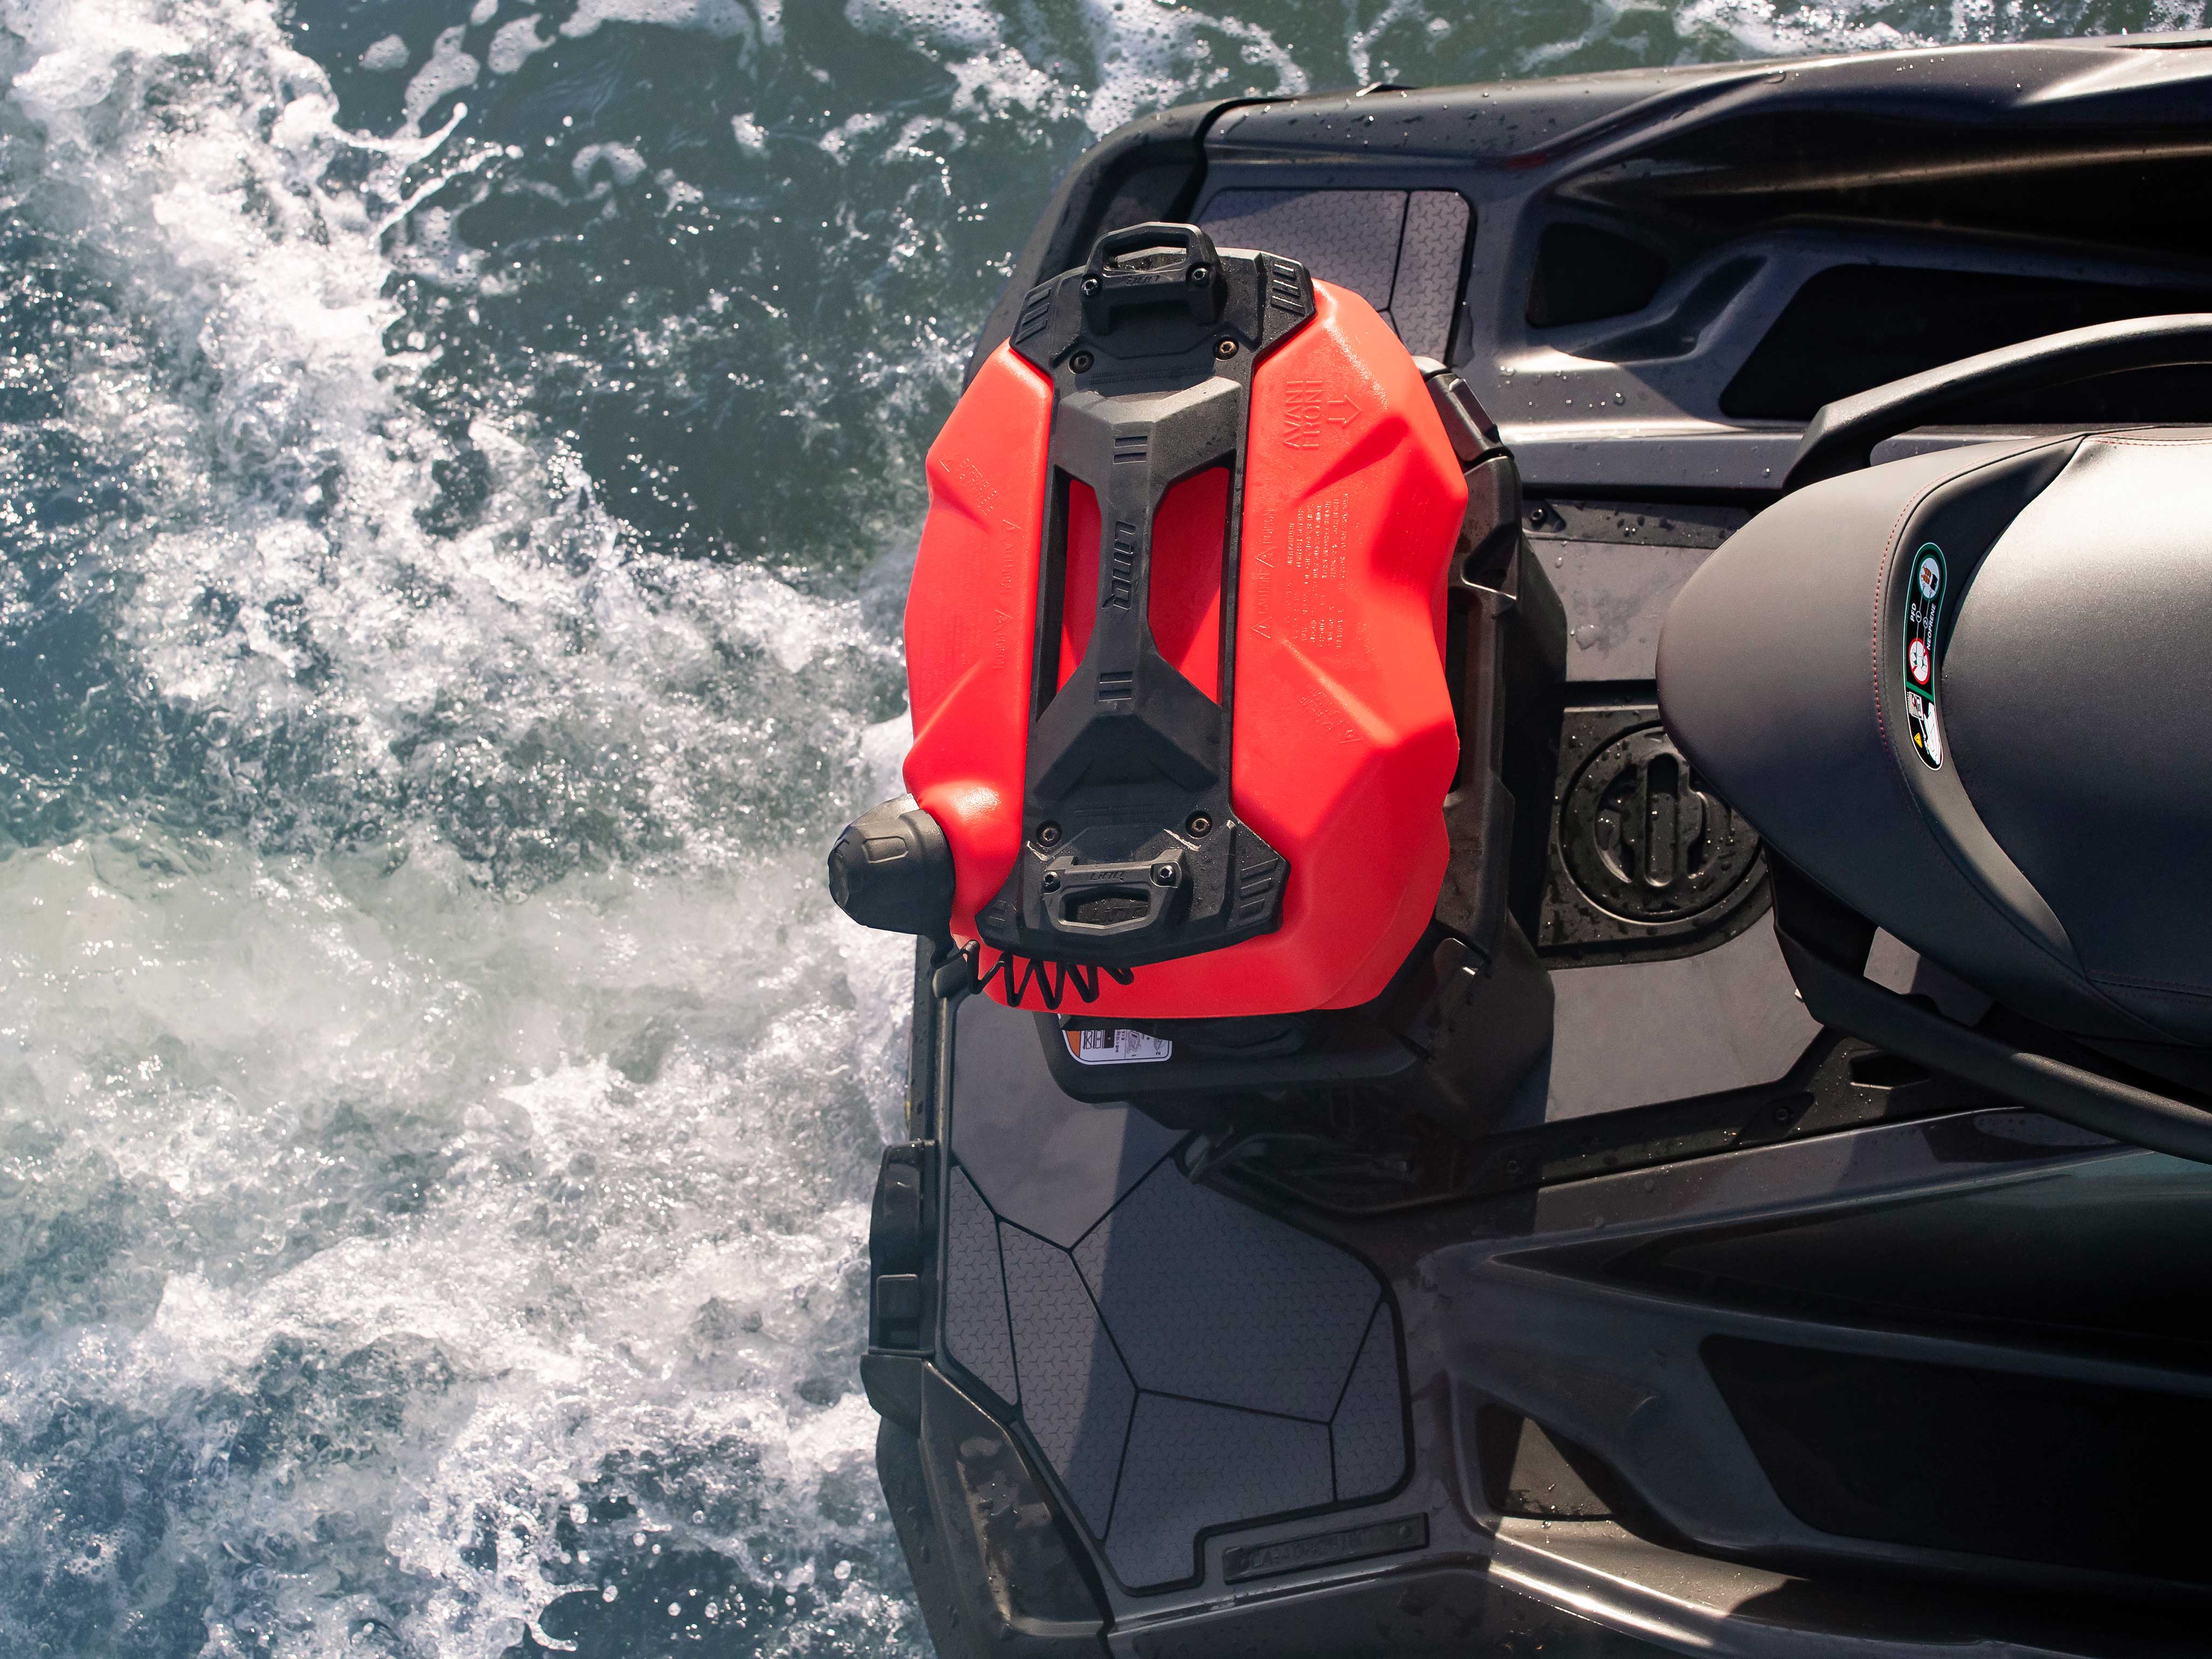 View of the font storage space of a Sea-Doo RXP-X